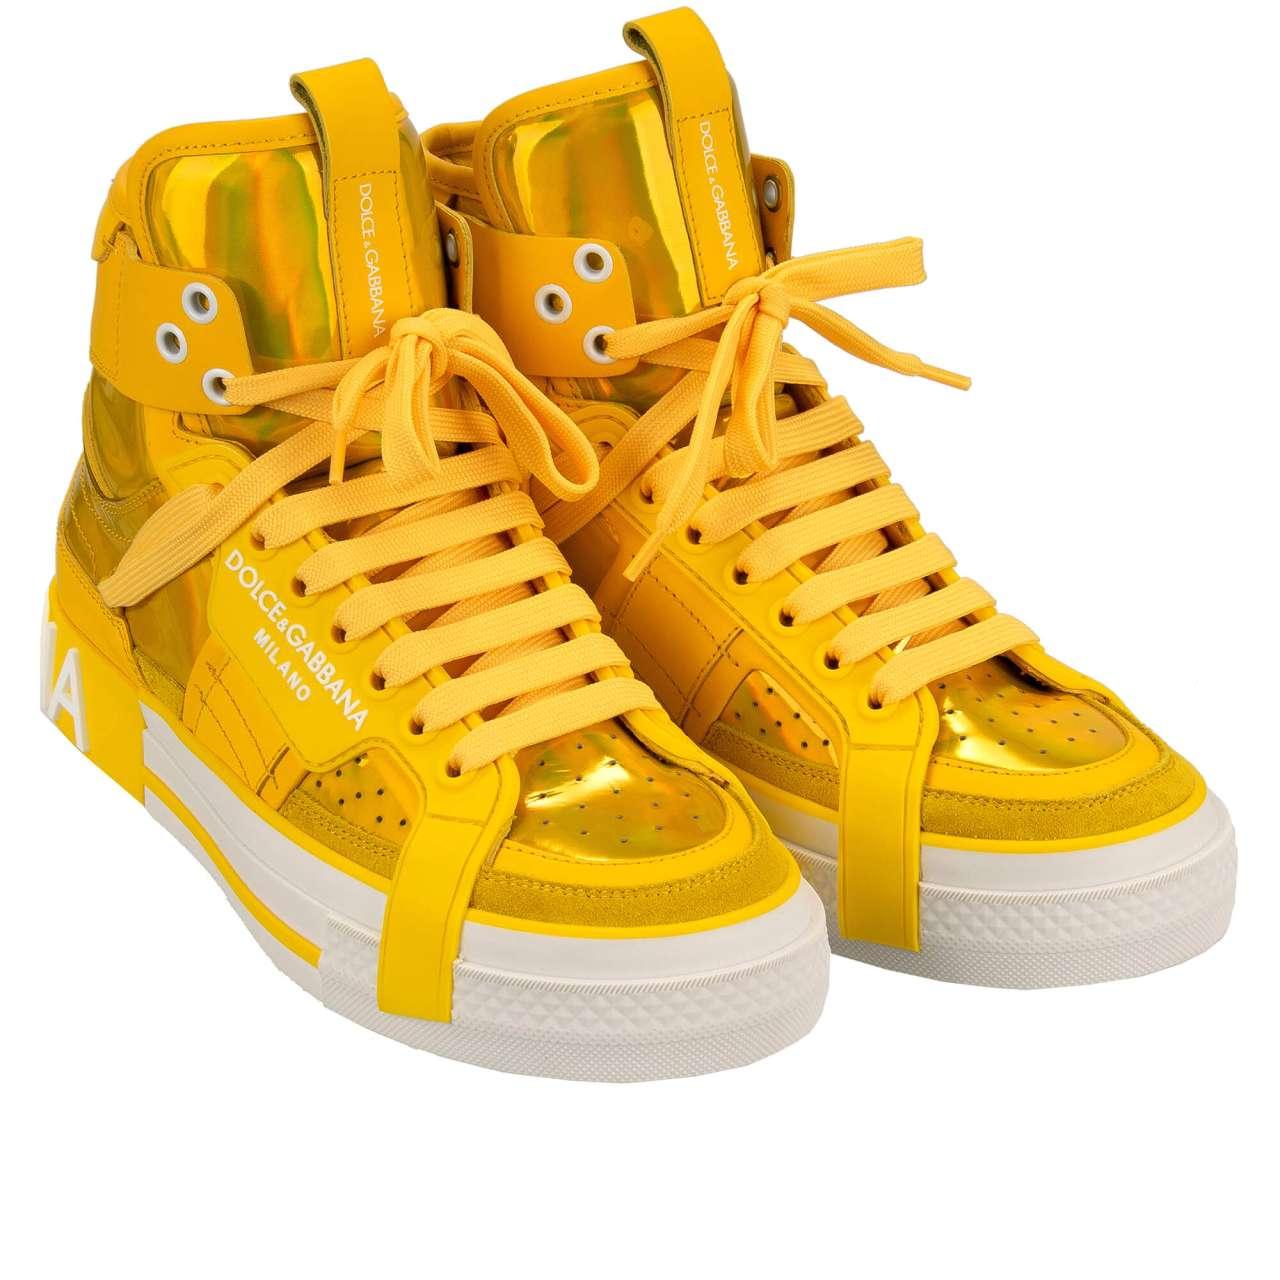 - Lace High Top Sneaker DONNA with rainbow shimmer yellow and DG logo by DOLCE & GABBANA - New with Box - MADE IN ITALY - Former RRP: EUR 895 - Model: CK1870-AO737-80204 - Material: 100% Calf leather - Sole: Rubber - Color: Yellow / White -